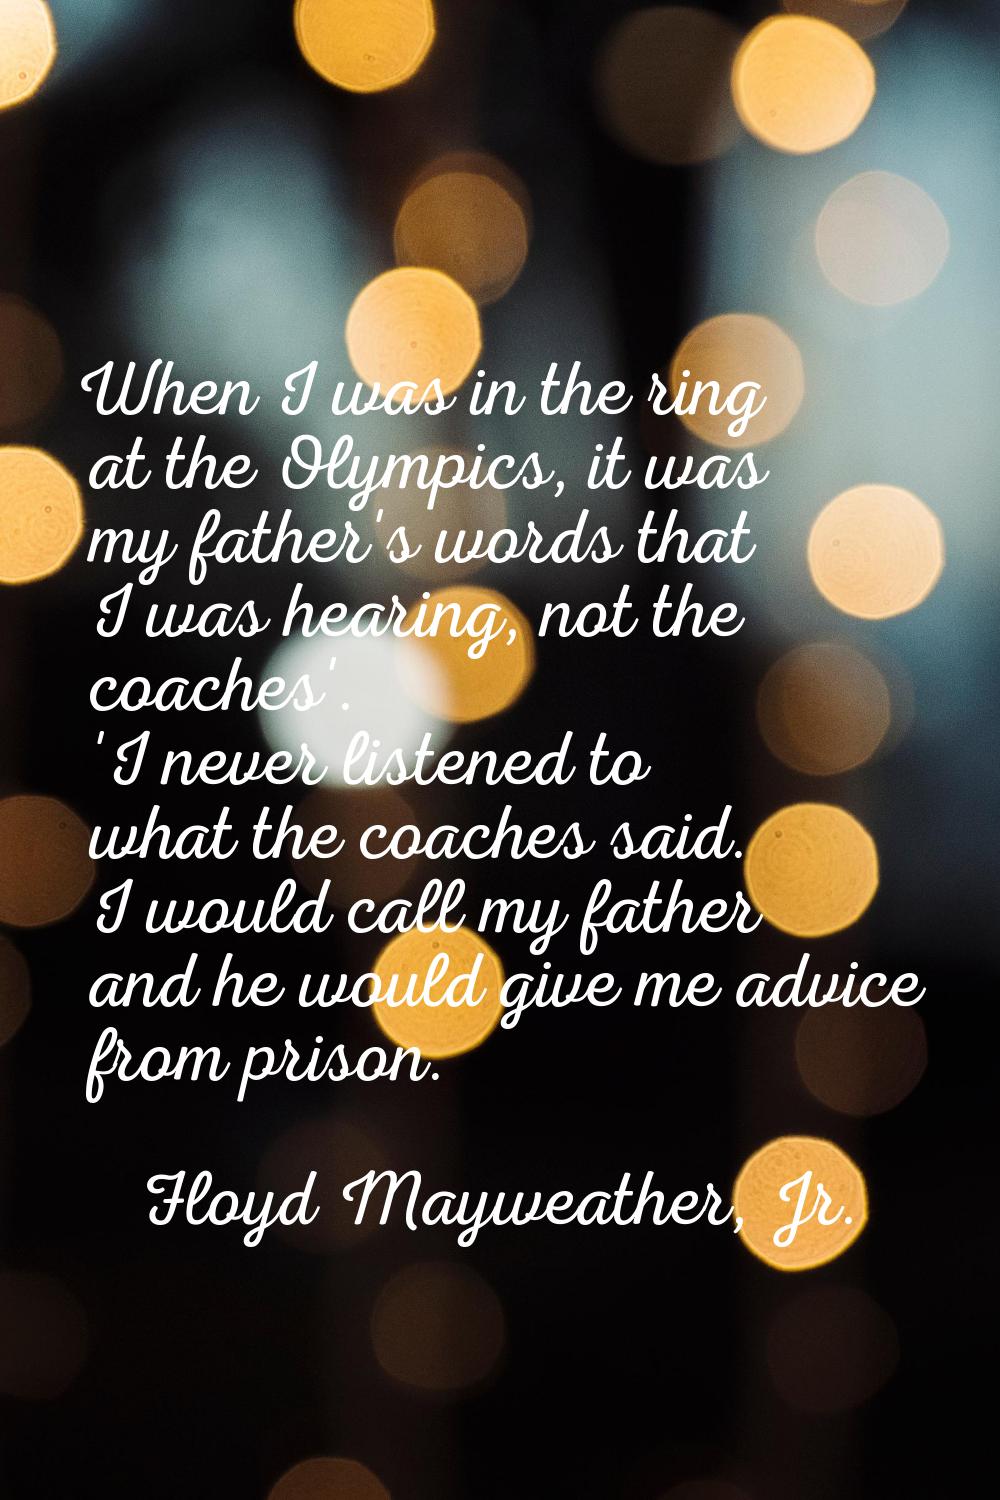 When I was in the ring at the Olympics, it was my father's words that I was hearing, not the coache